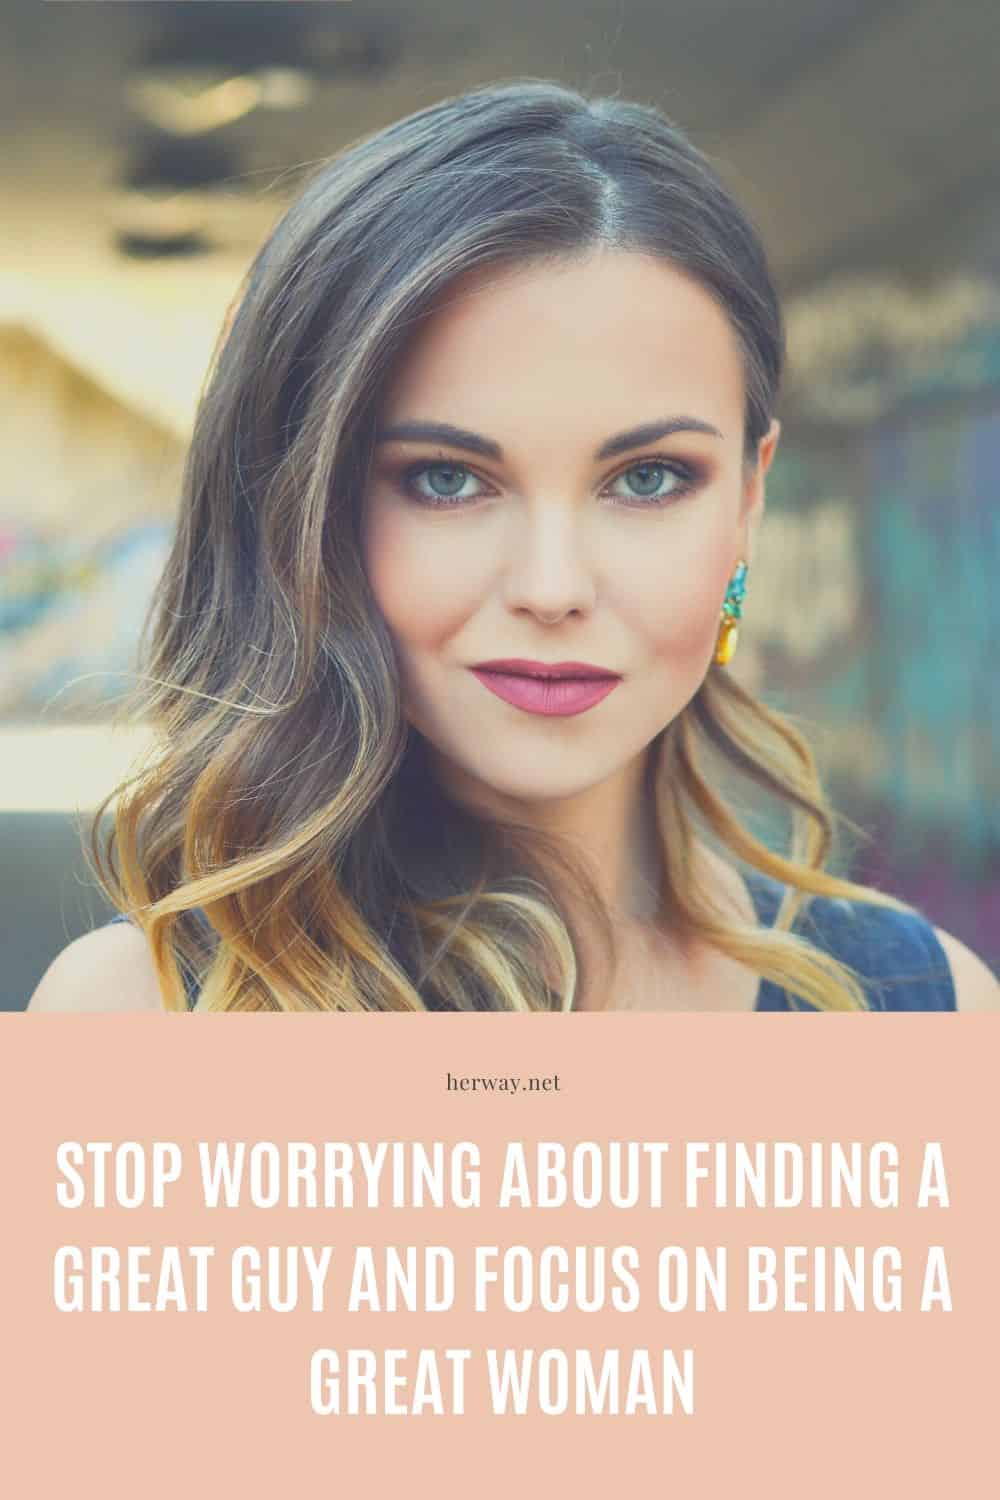 Stop Worrying About Finding A Great Guy And Focus On Being A Great Woman